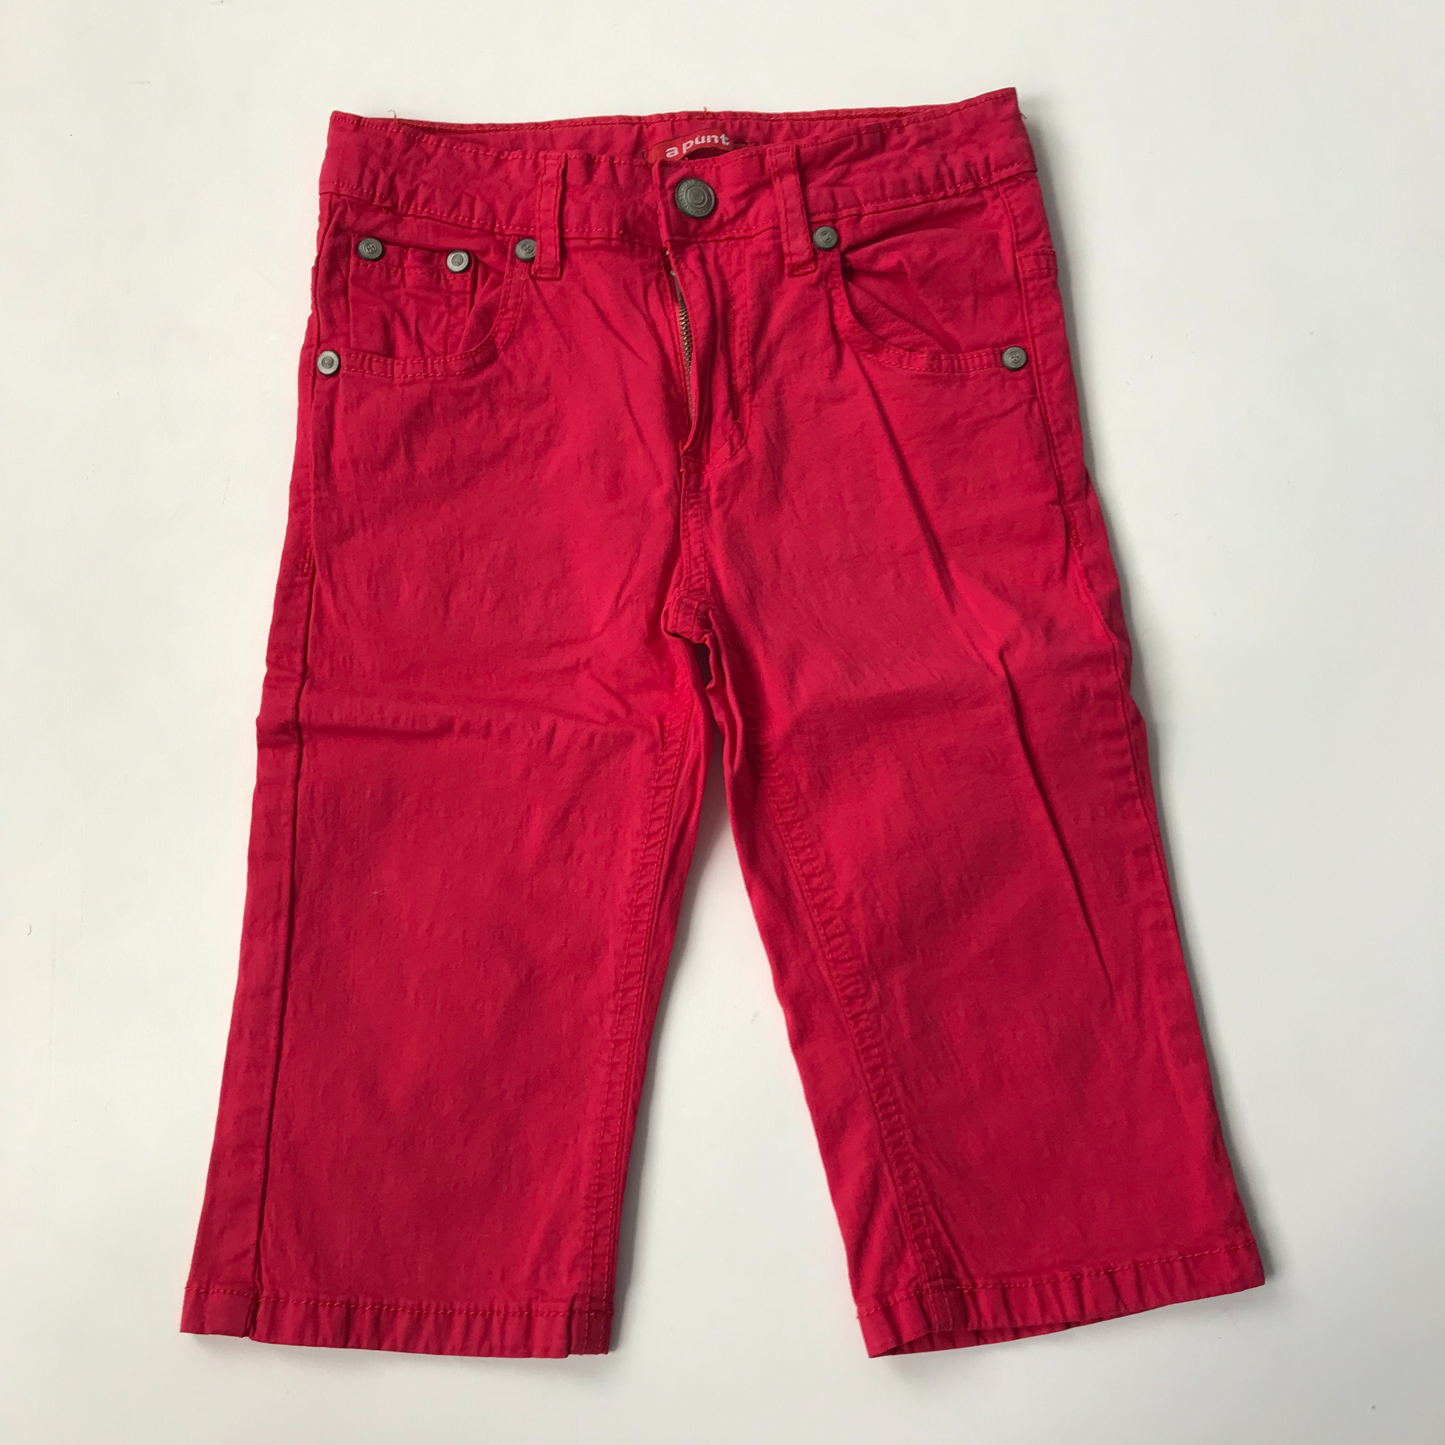 Shorts - Long Red - Age 8